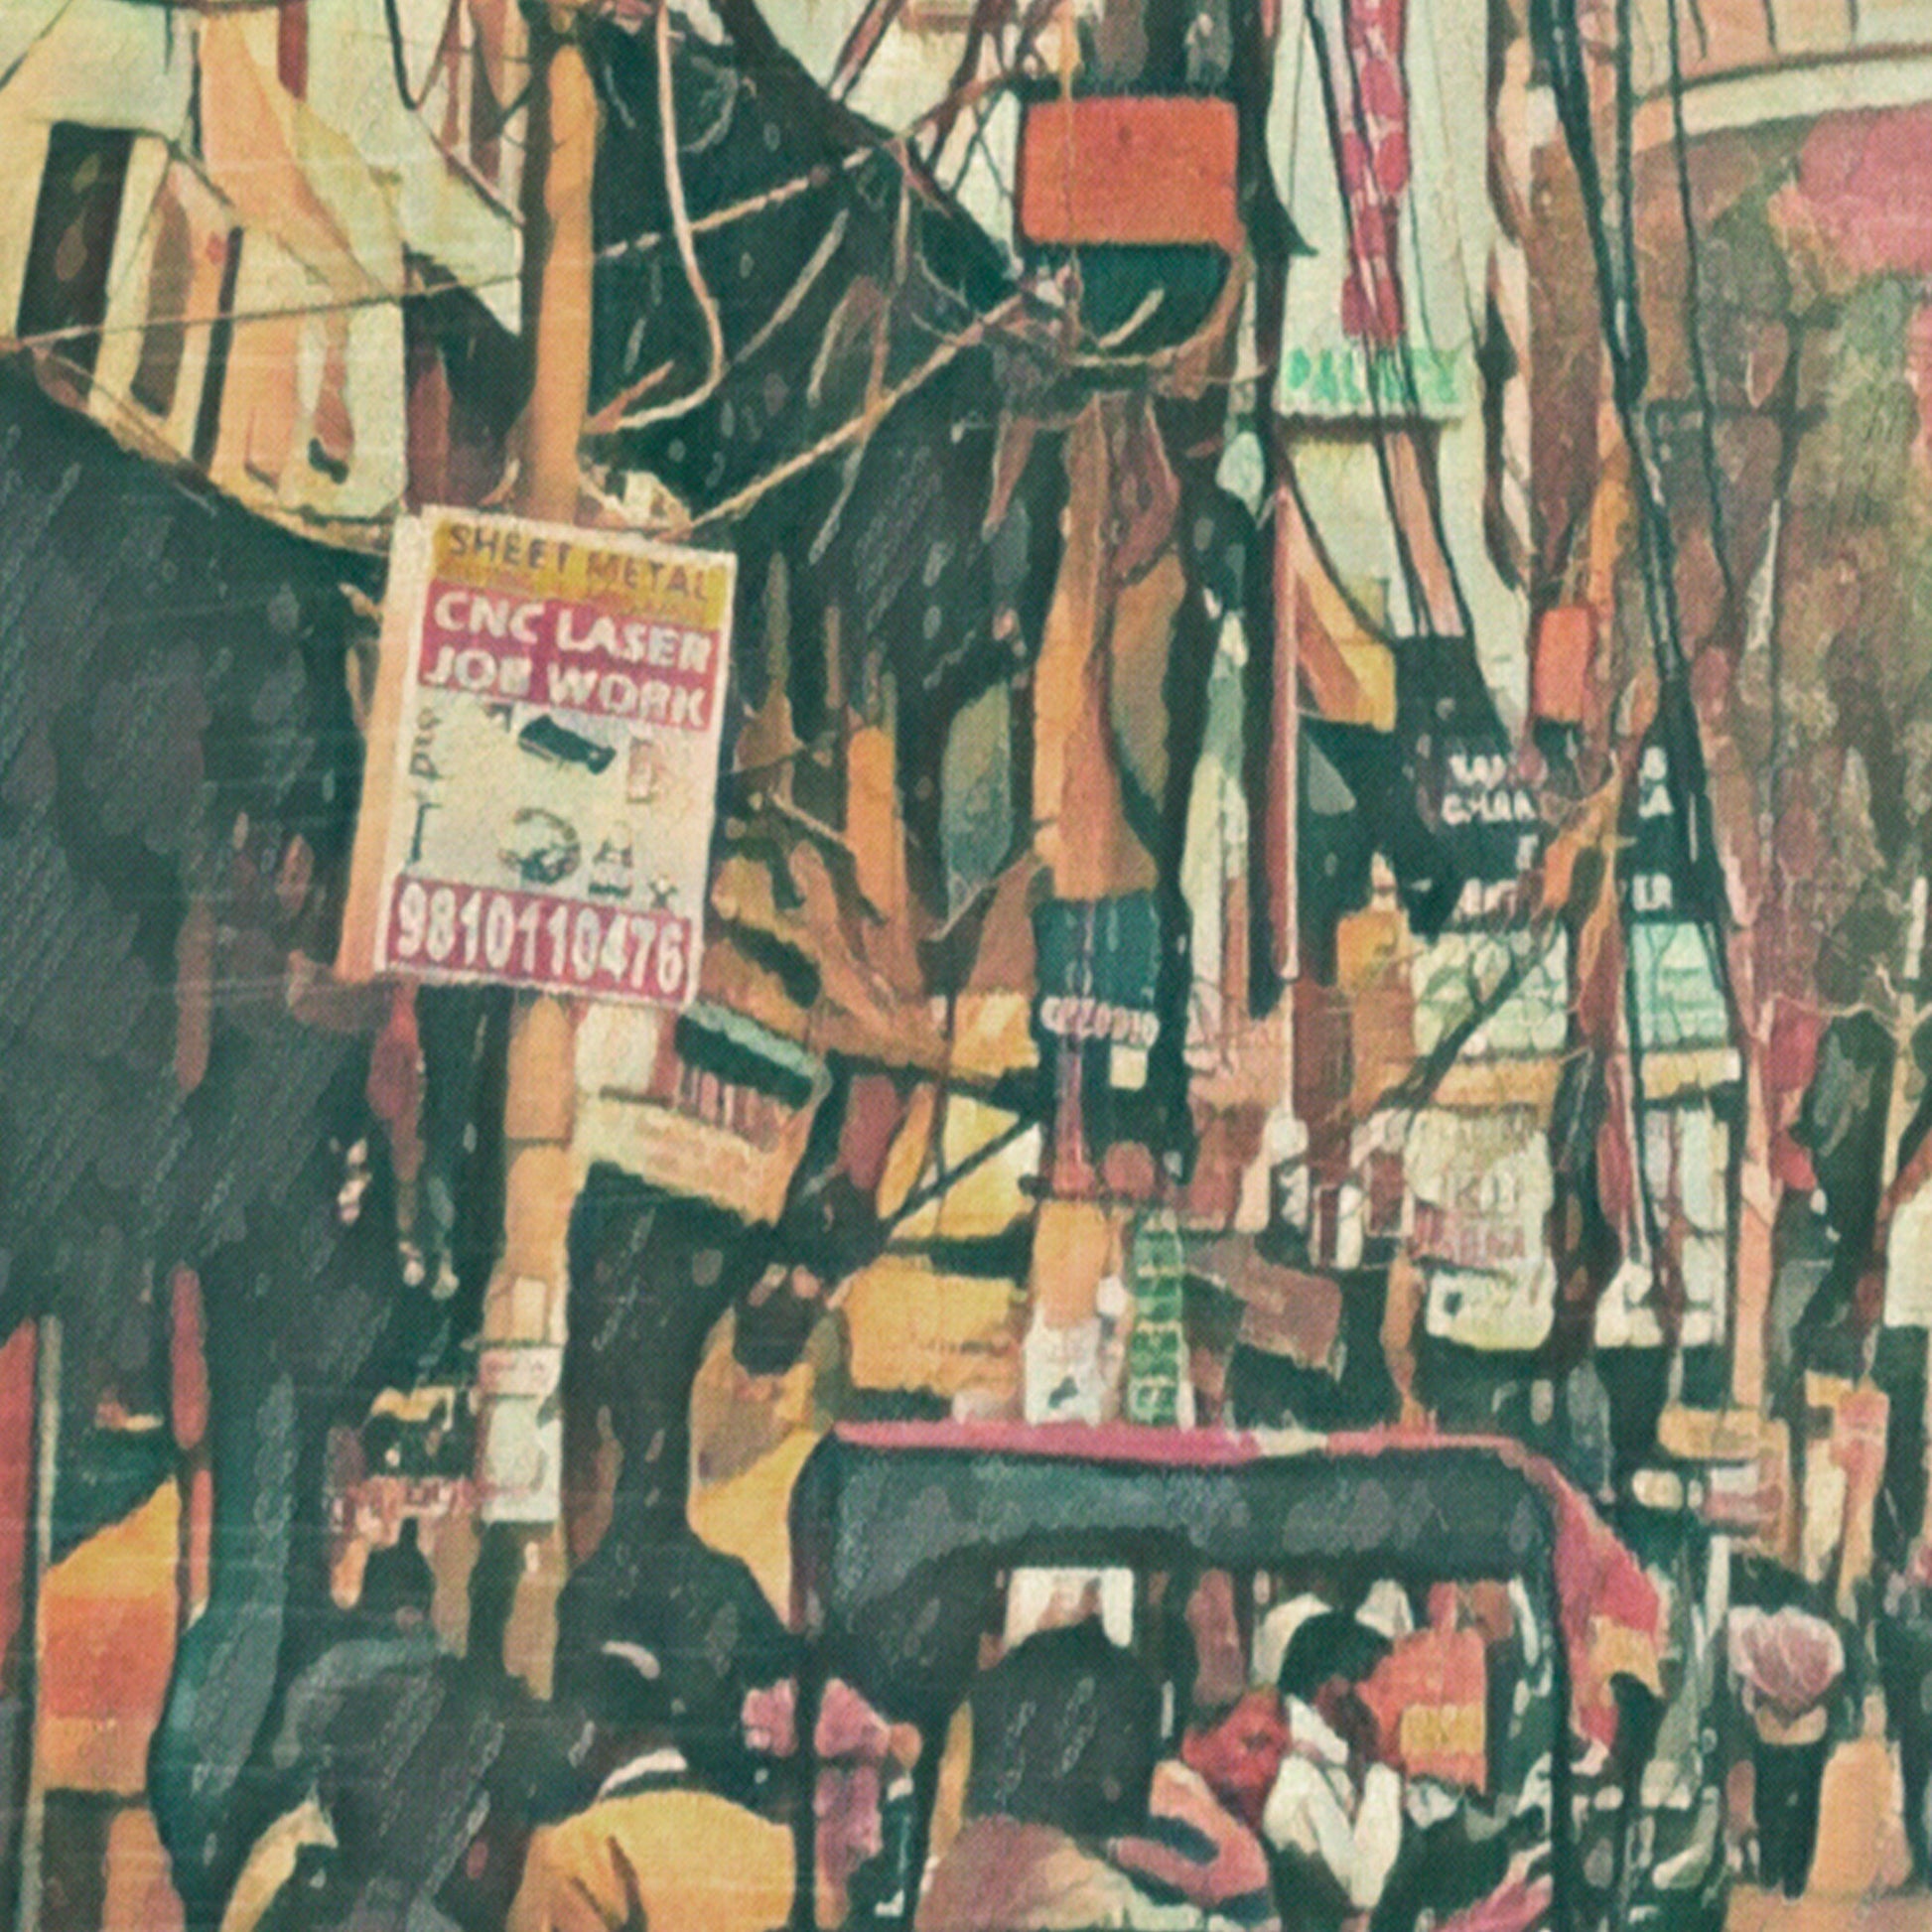 Details of the street in the Old Delhi poster by Alecse